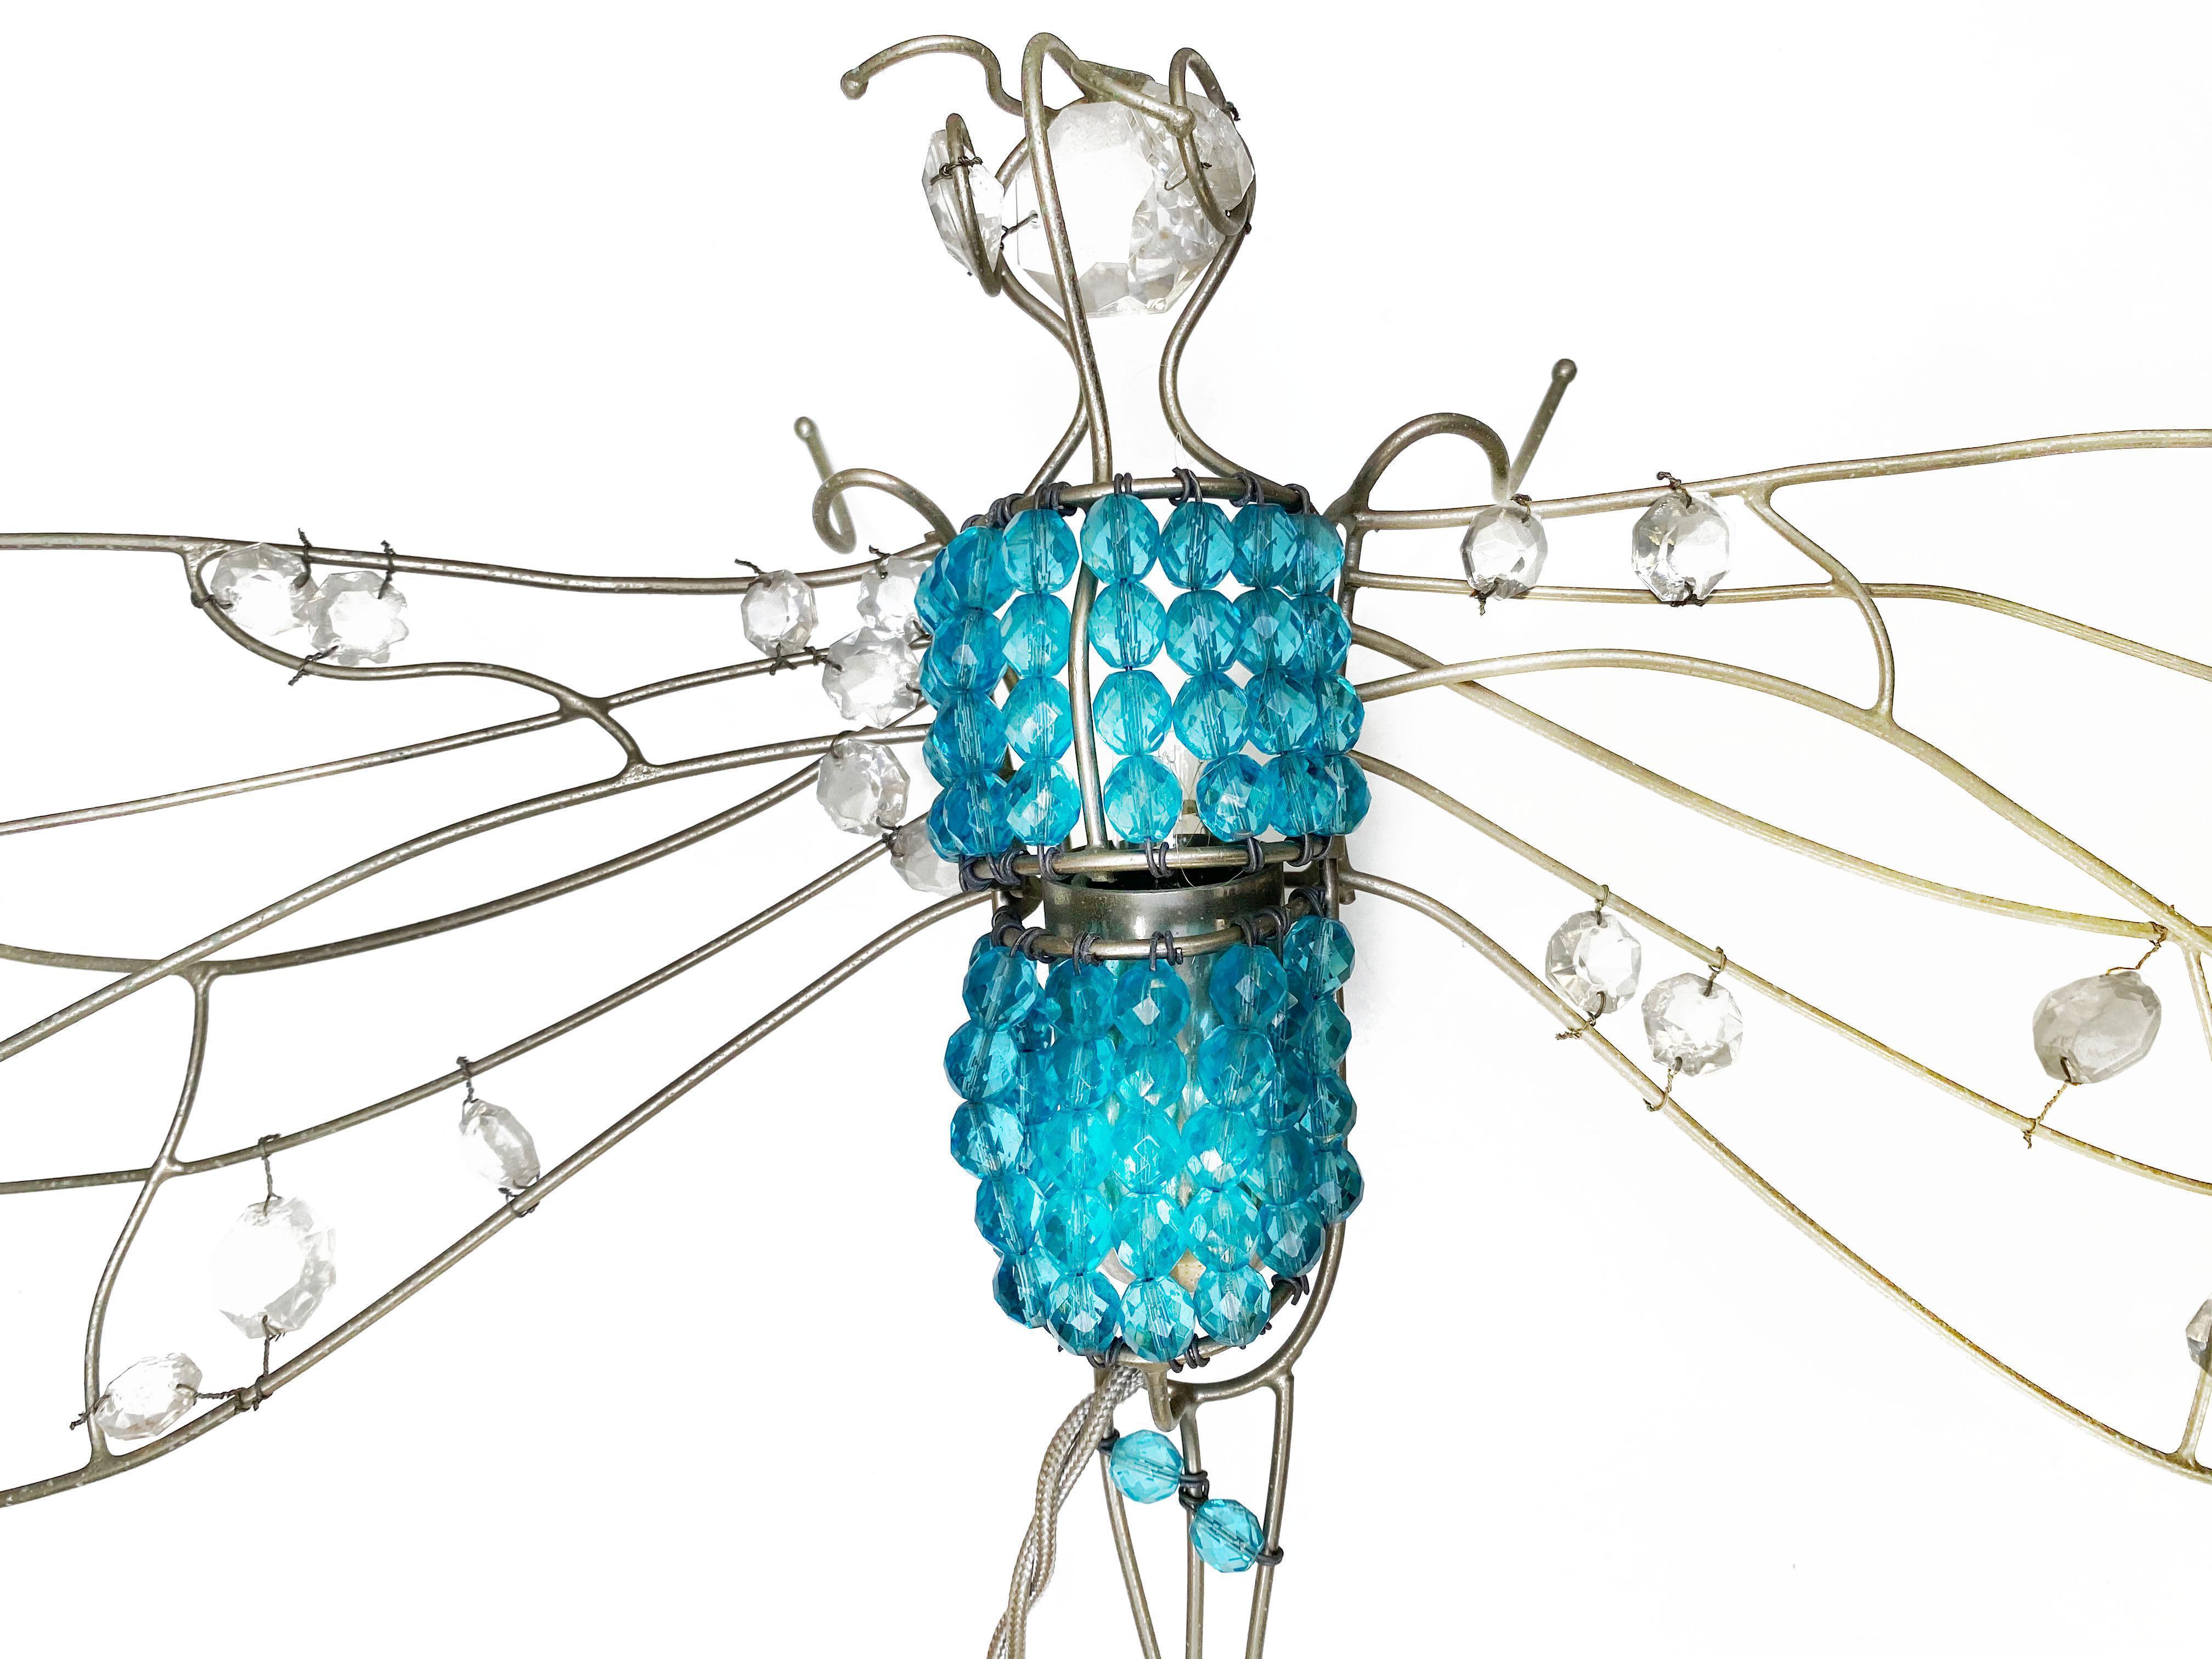 Italian sconce
Dragonfly 
Glass and worked wire
circa 1960
Measures: 65 x 76 x 10
690 Euros.